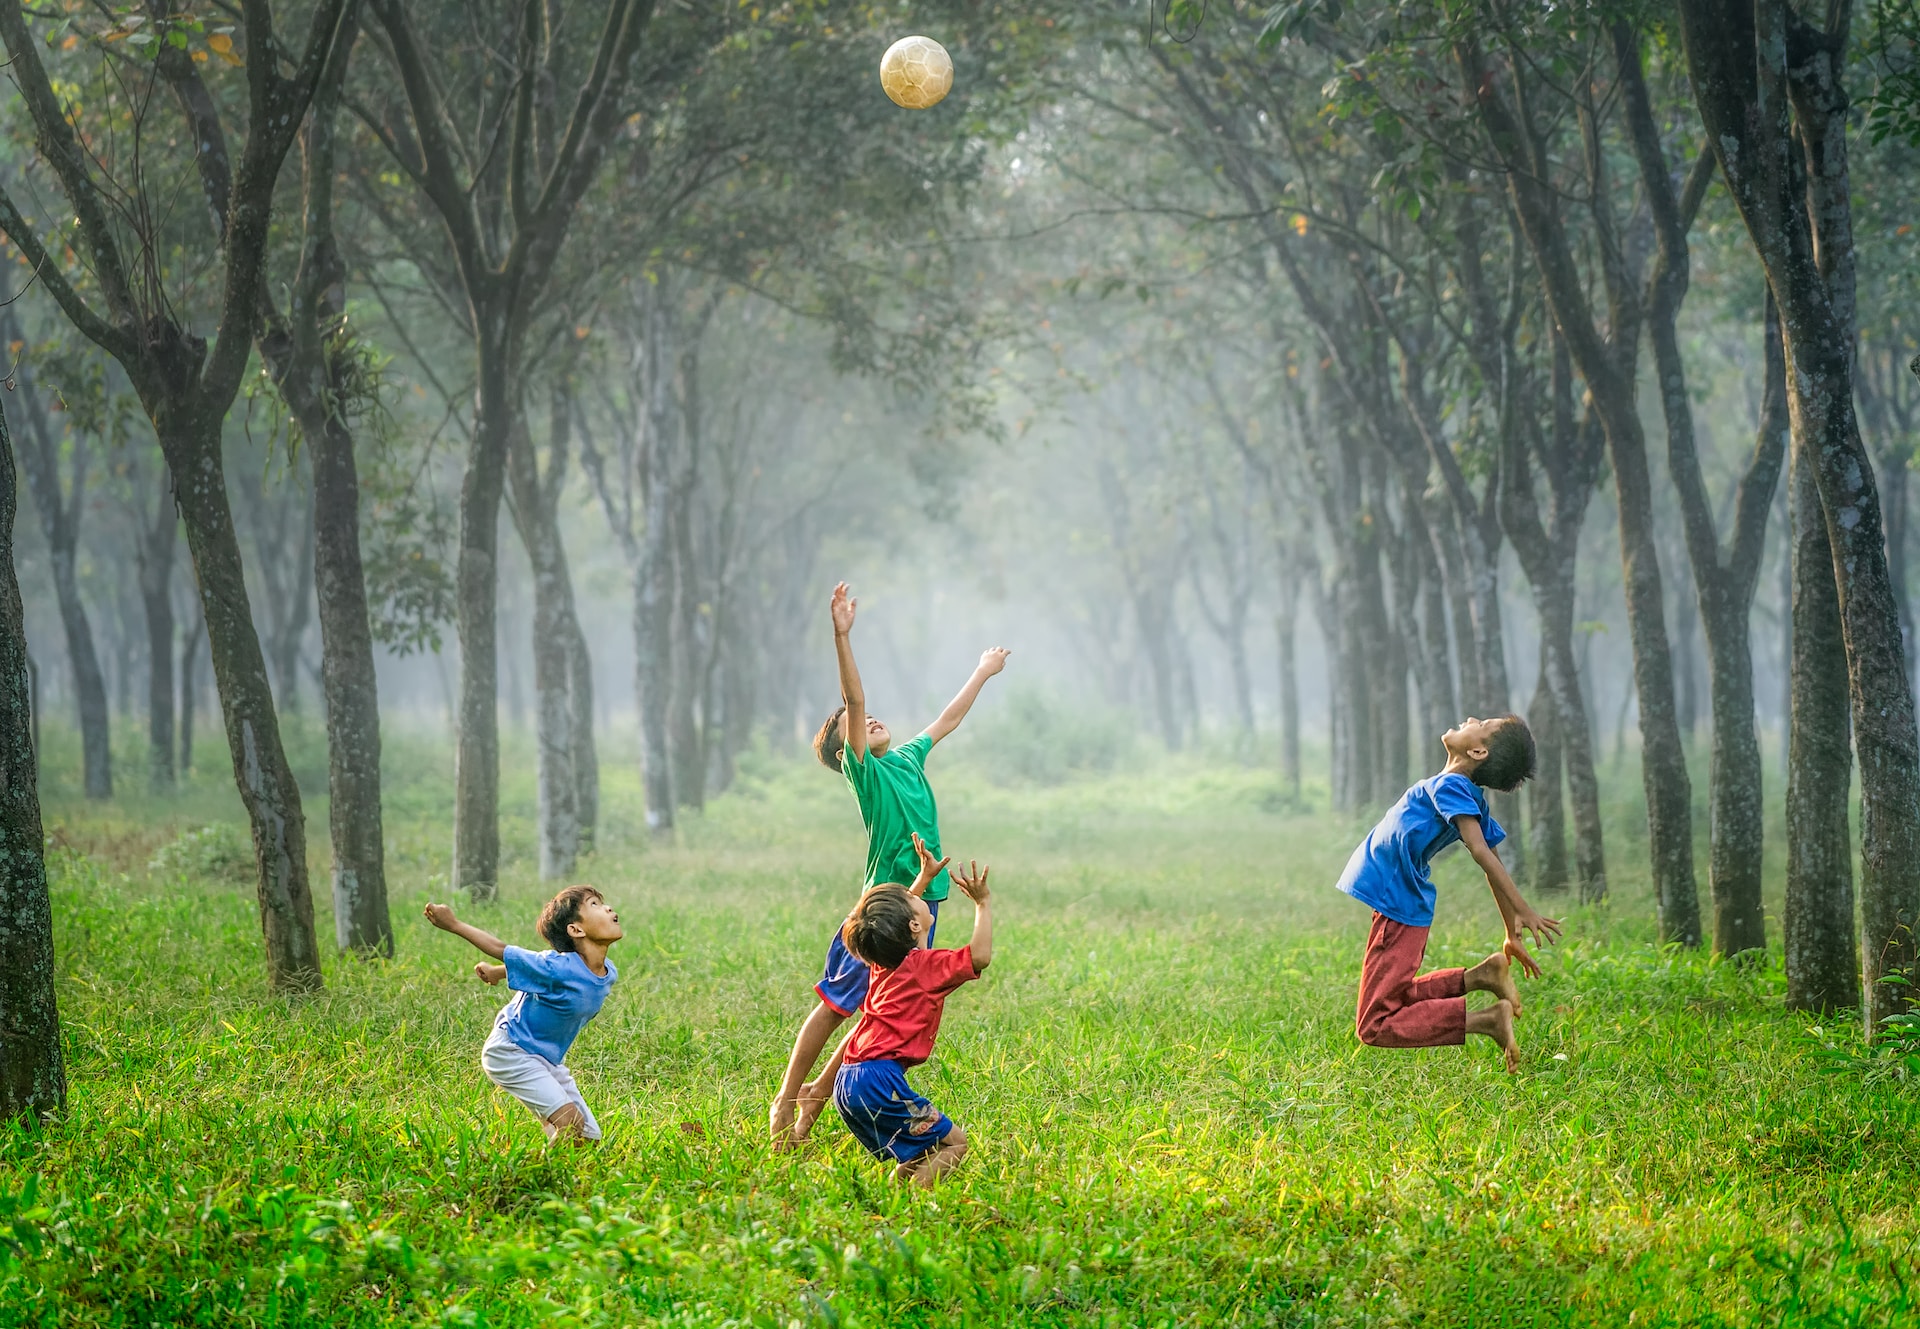 Kids playing in the forest